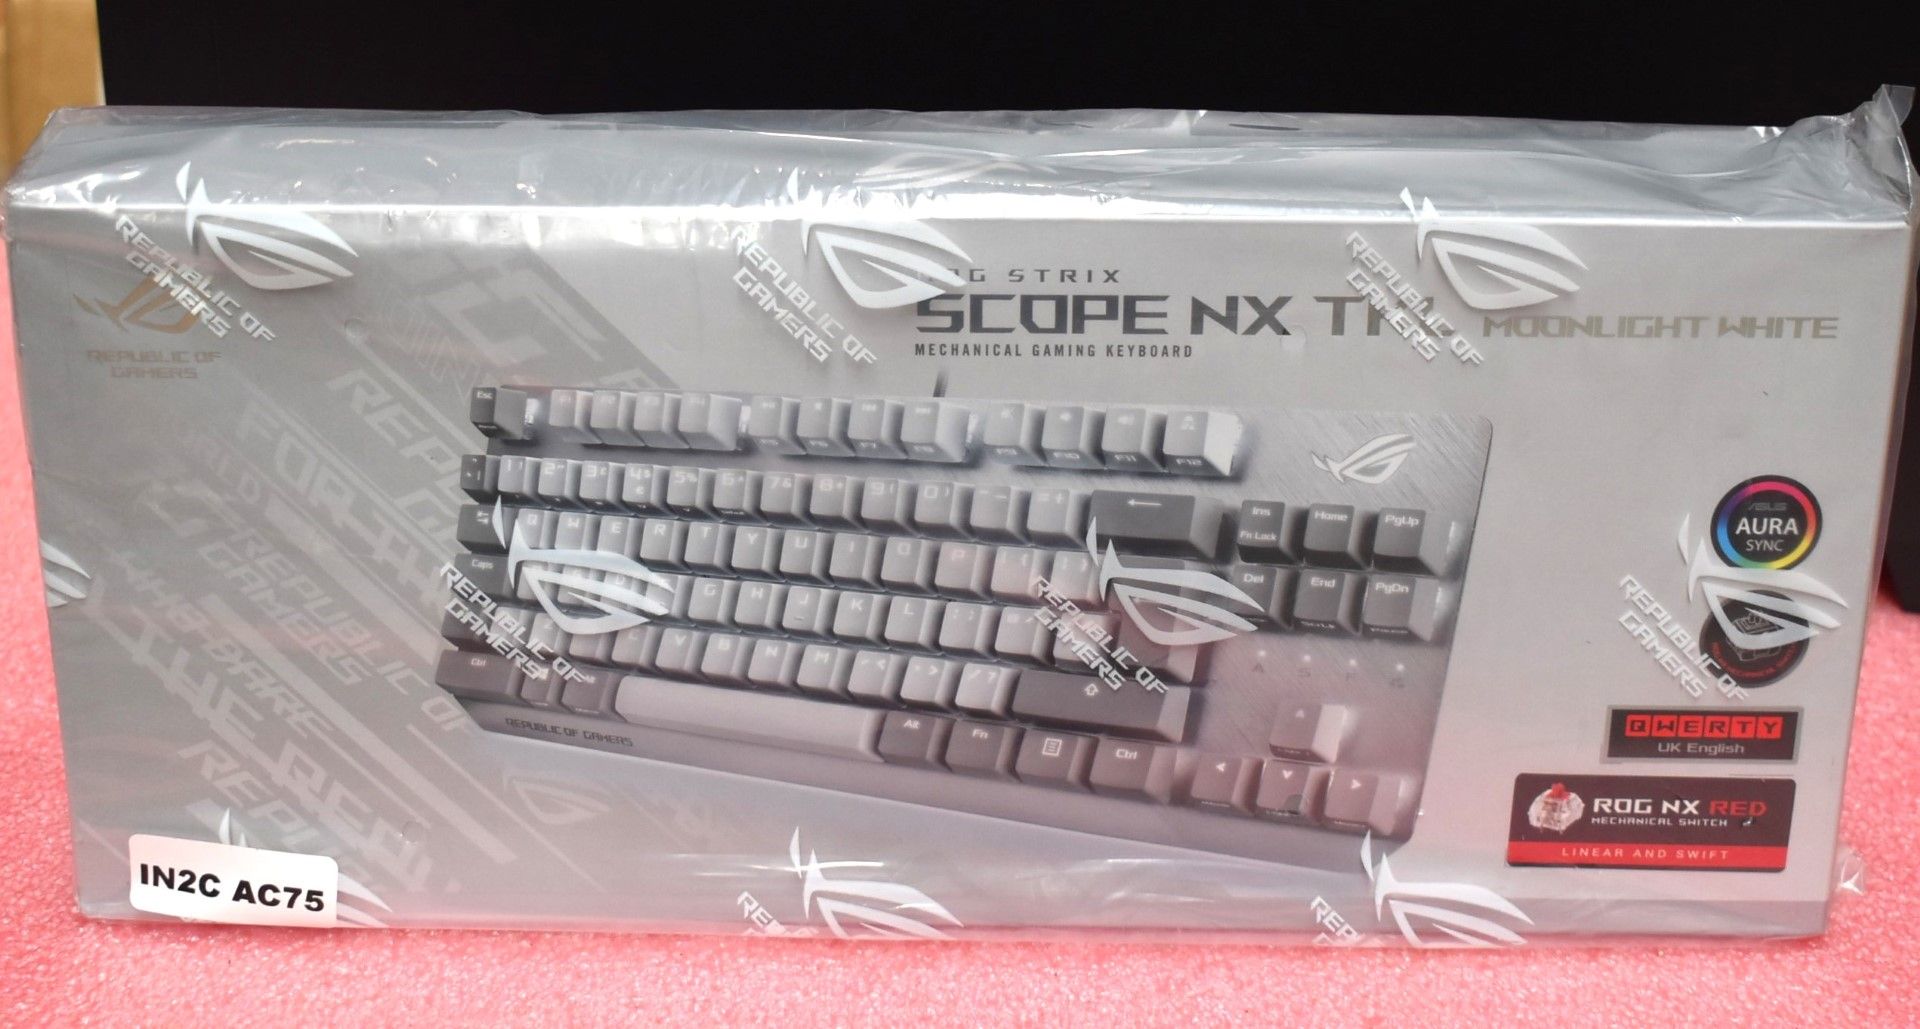 1 x Asus ROG Strix Scope NX TKL Moonlight White Wired Mechanical RGB Gaming Keyboard - Features - Image 4 of 6